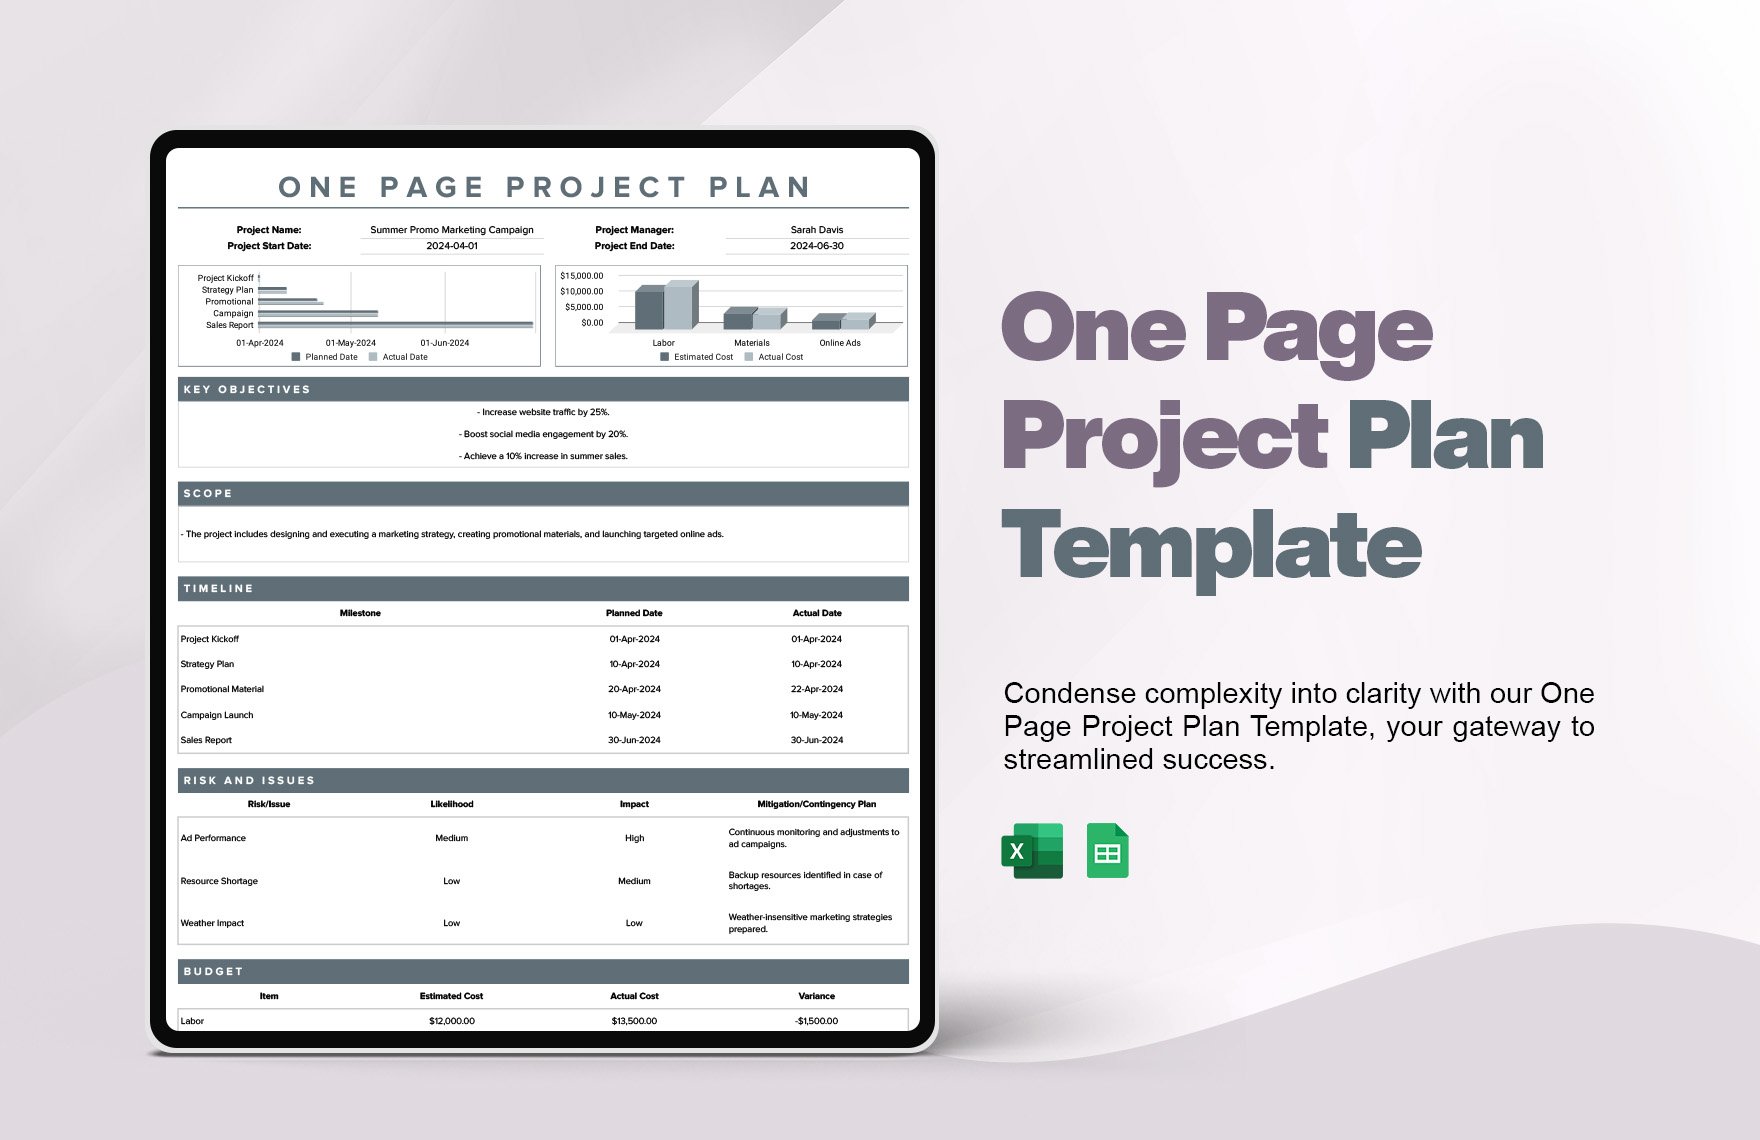 One Page Project Plan Template